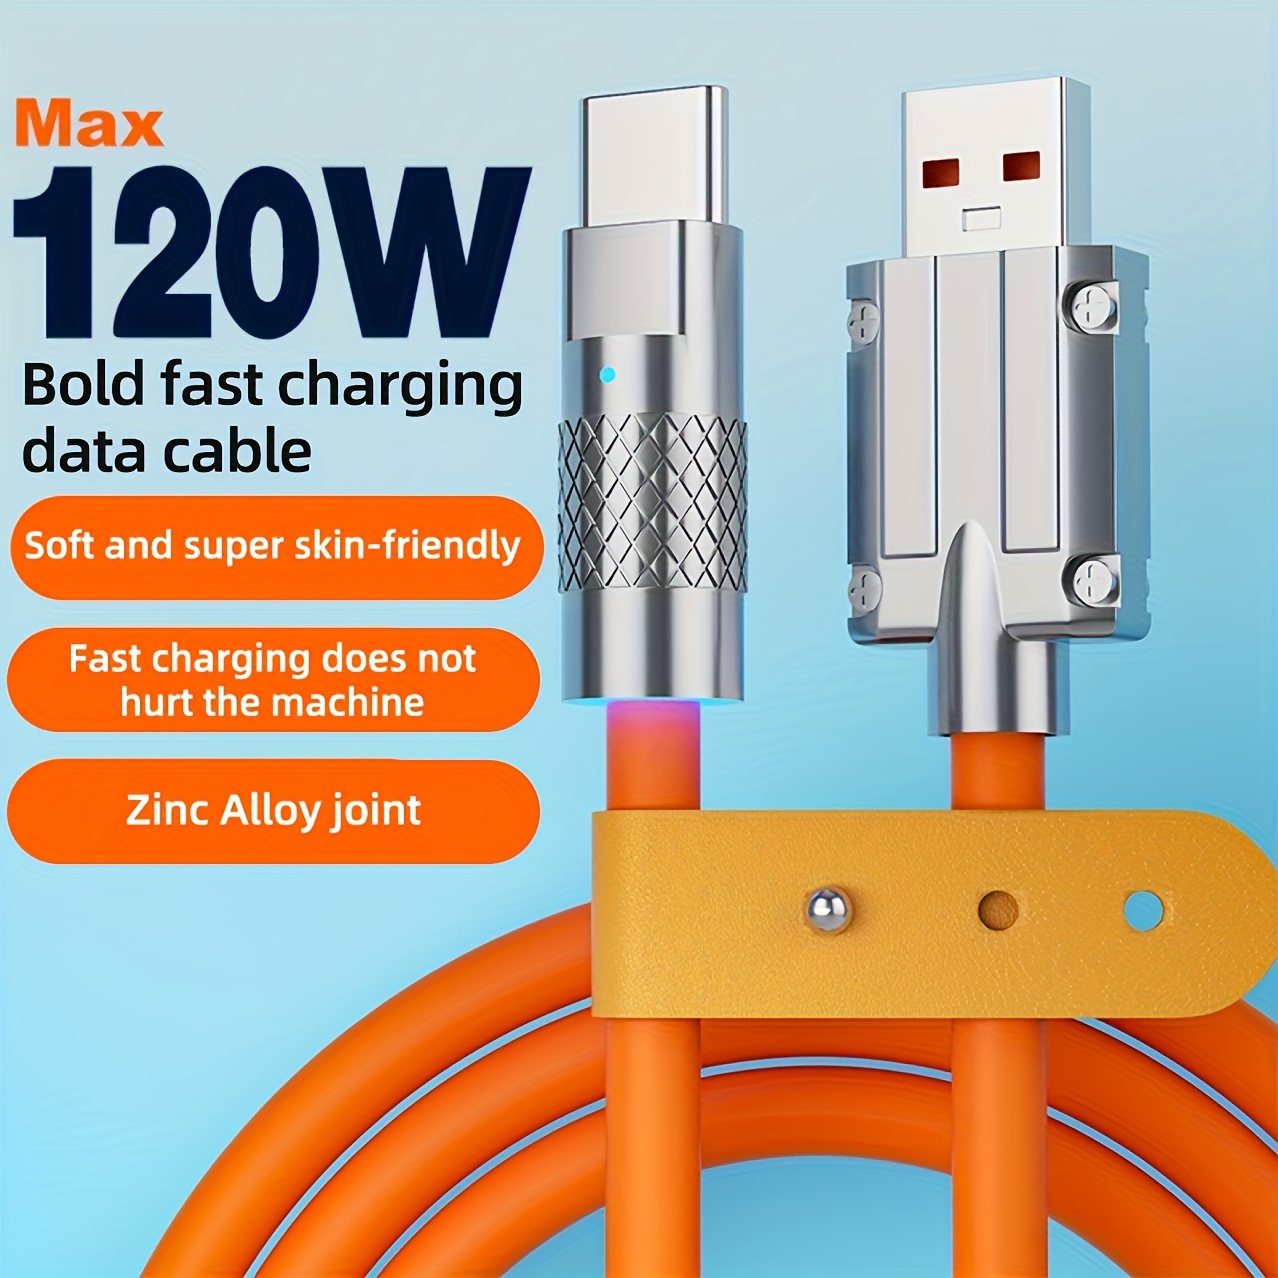 

2024 New 6a 120w Fast Charging Data Cable With Indicator Light For Usb Type C Smartphones Compatible With Samsung, Xiaomi, Vivo, , Redmi & More!